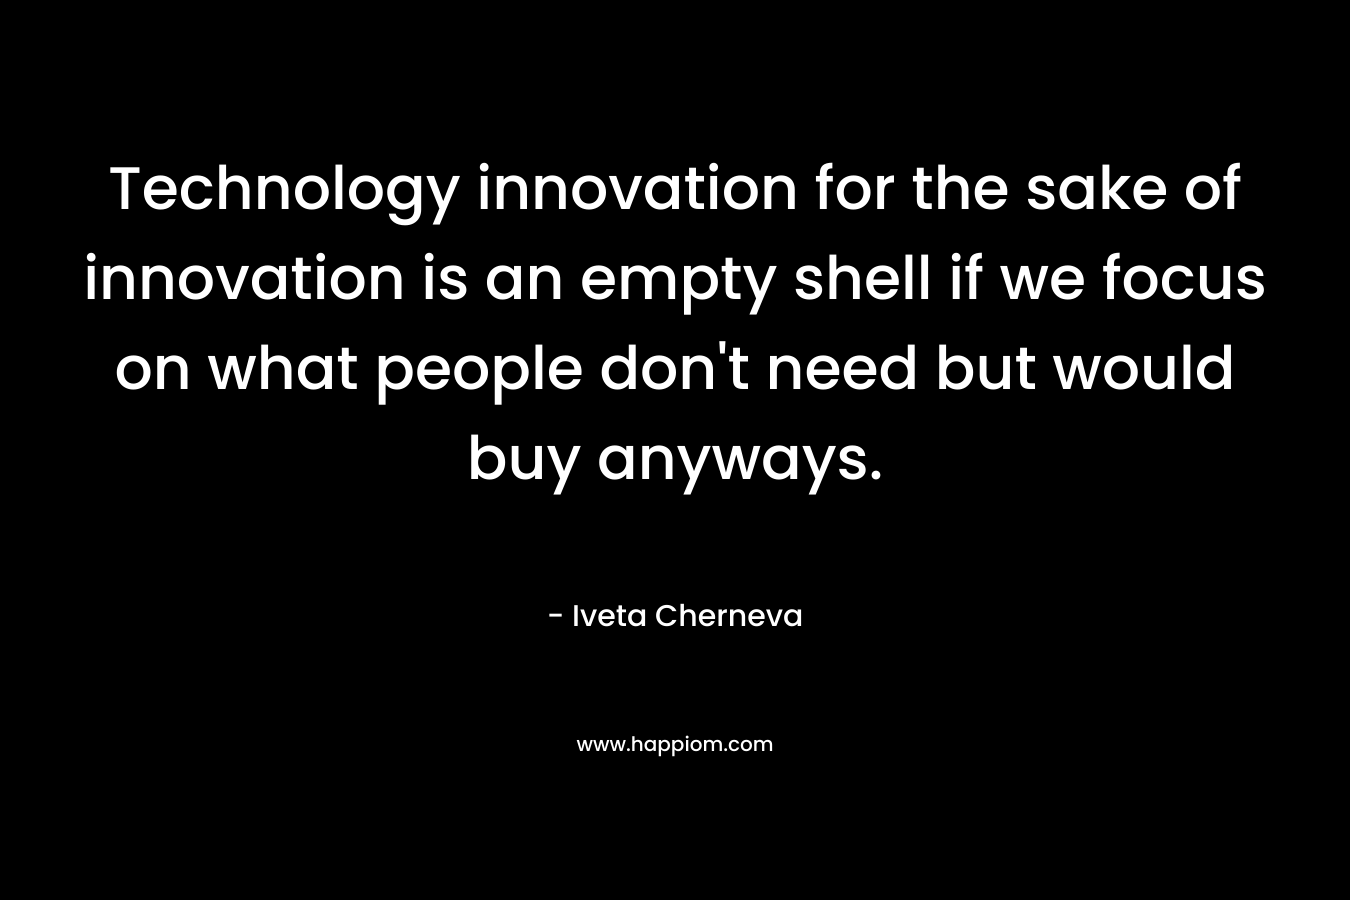 Technology innovation for the sake of innovation is an empty shell if we focus on what people don’t need but would buy anyways. – Iveta Cherneva